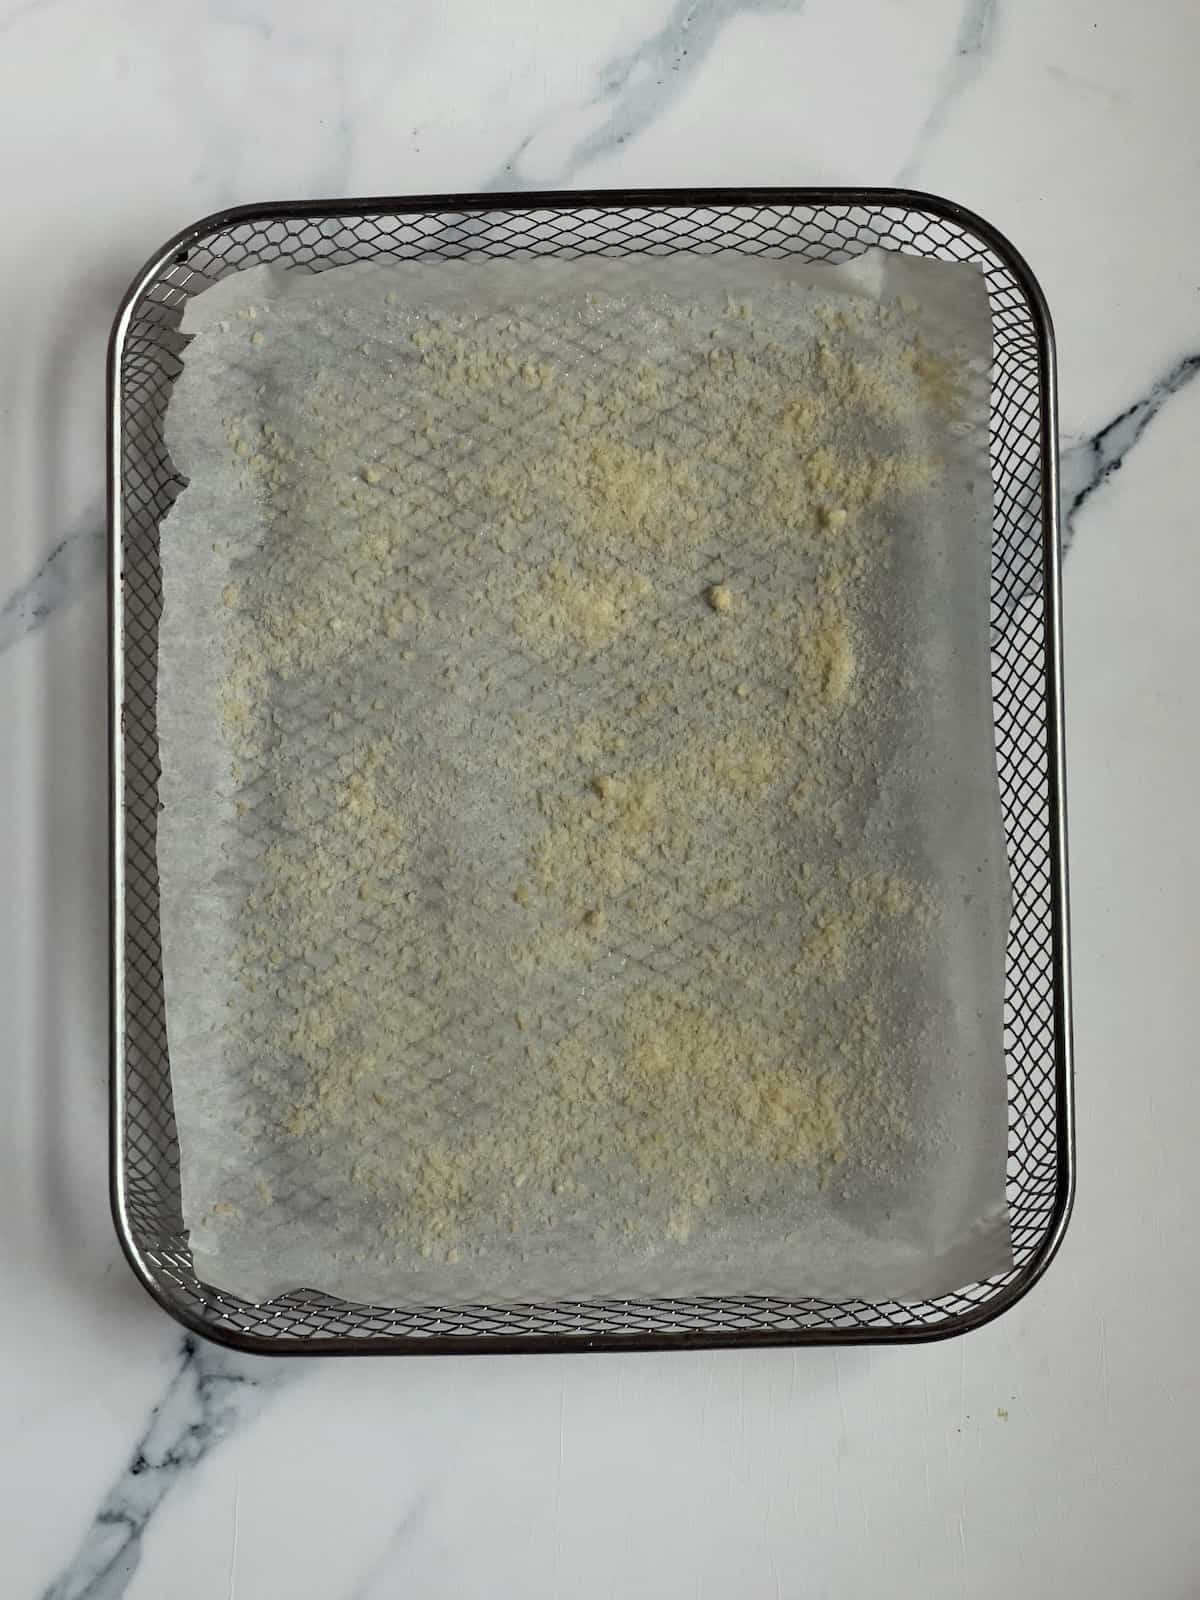 parchment paper and parmesan cheese on an air fryer basket